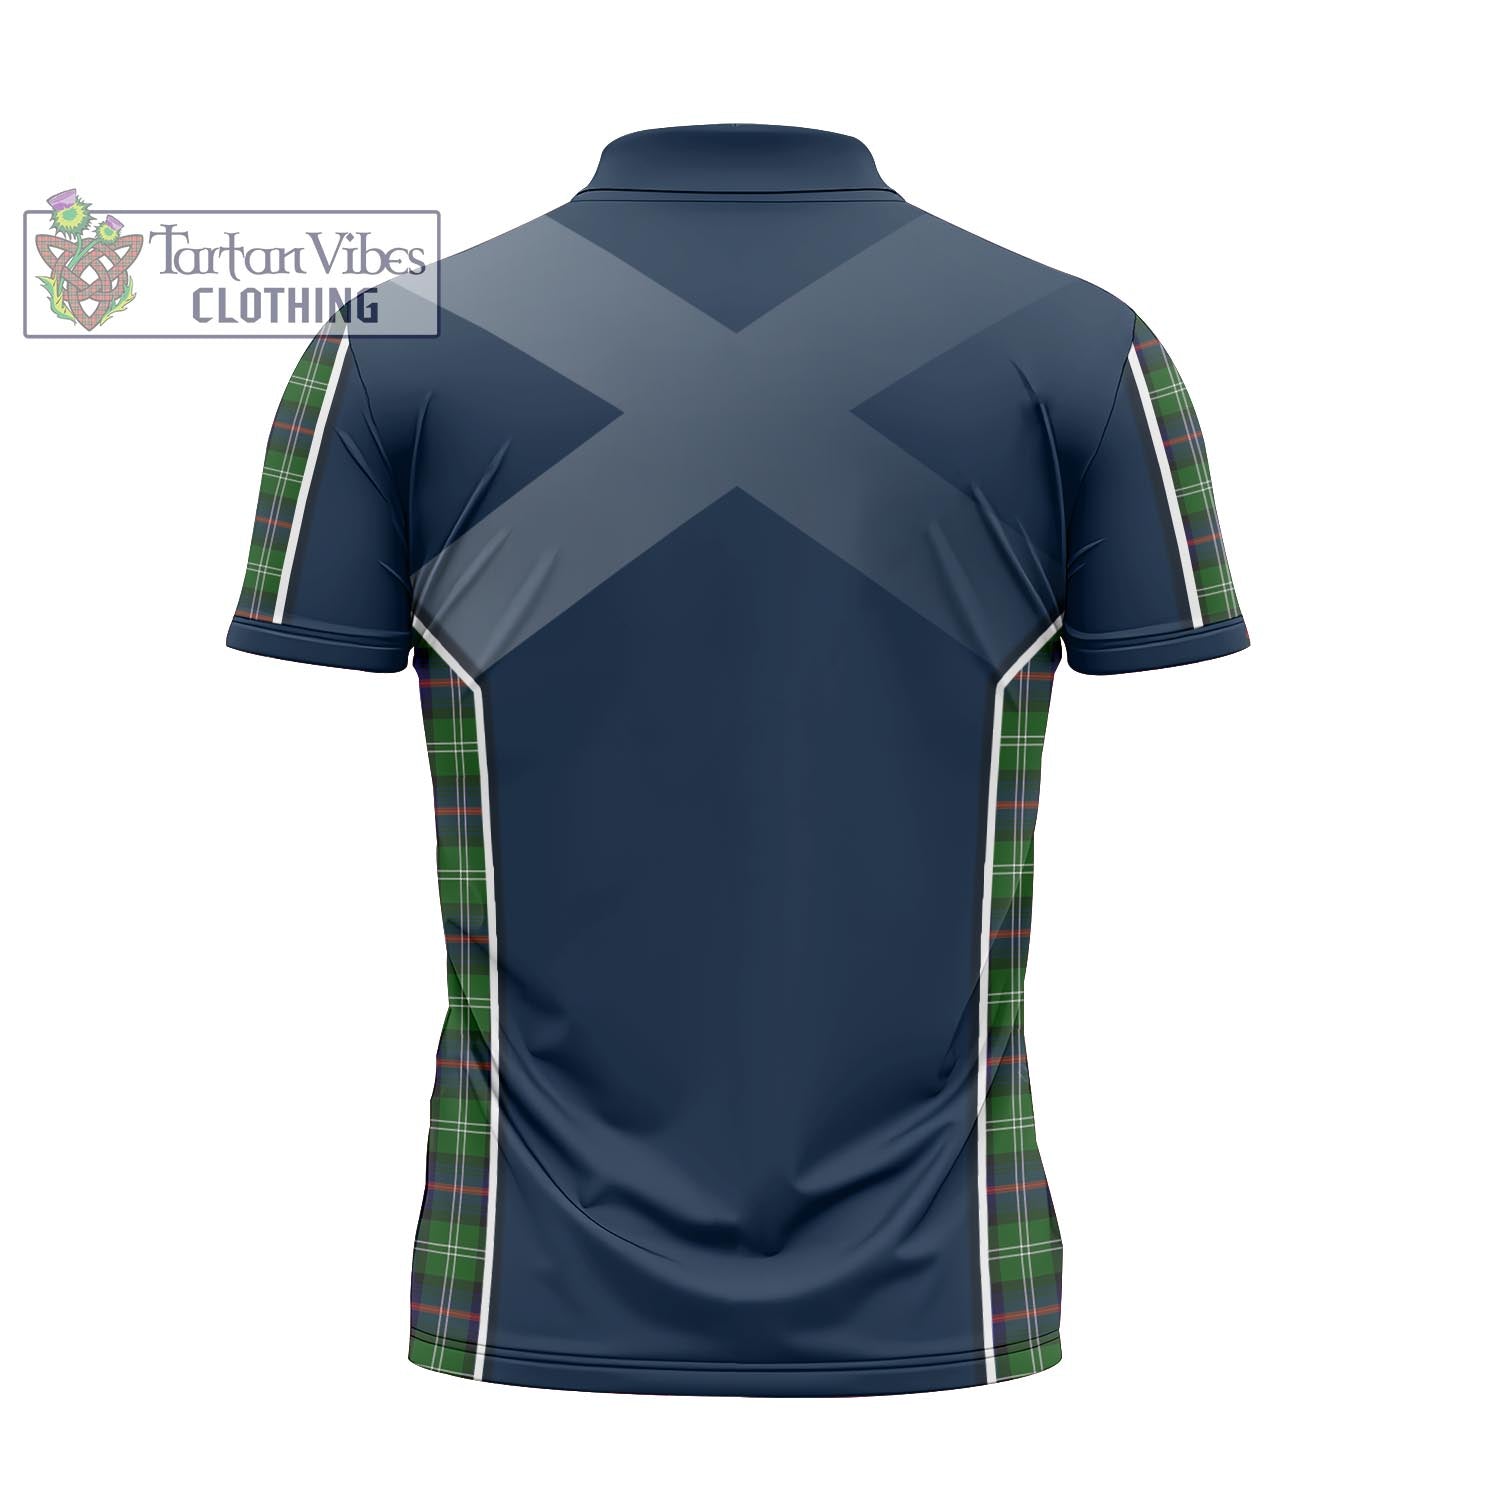 Tartan Vibes Clothing Sutherland Modern Tartan Zipper Polo Shirt with Family Crest and Scottish Thistle Vibes Sport Style